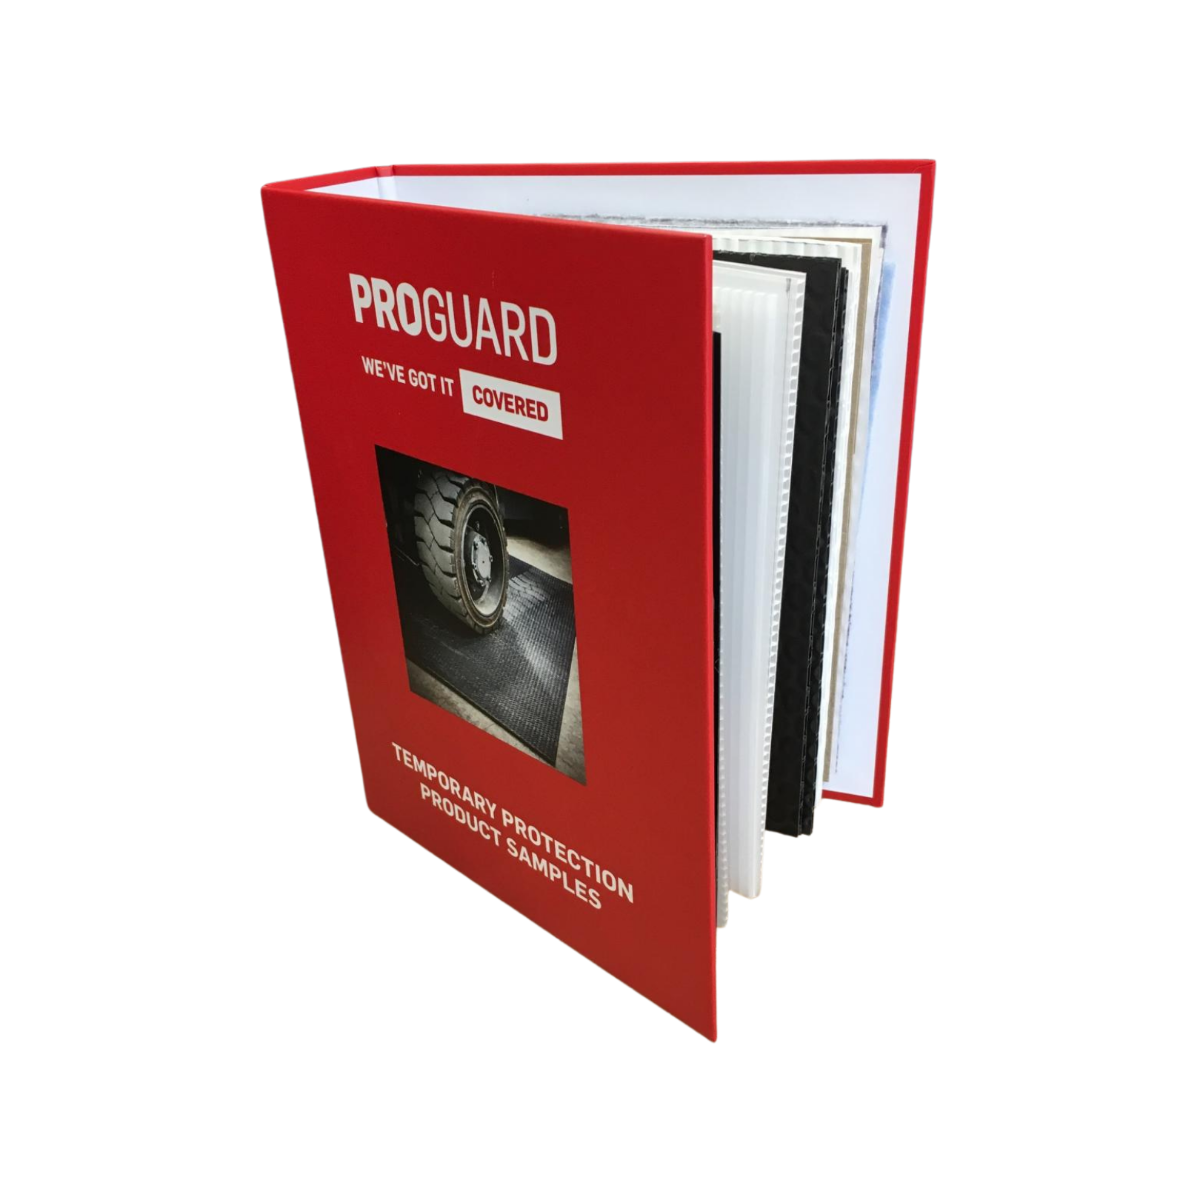 Proguard protective samples booklet